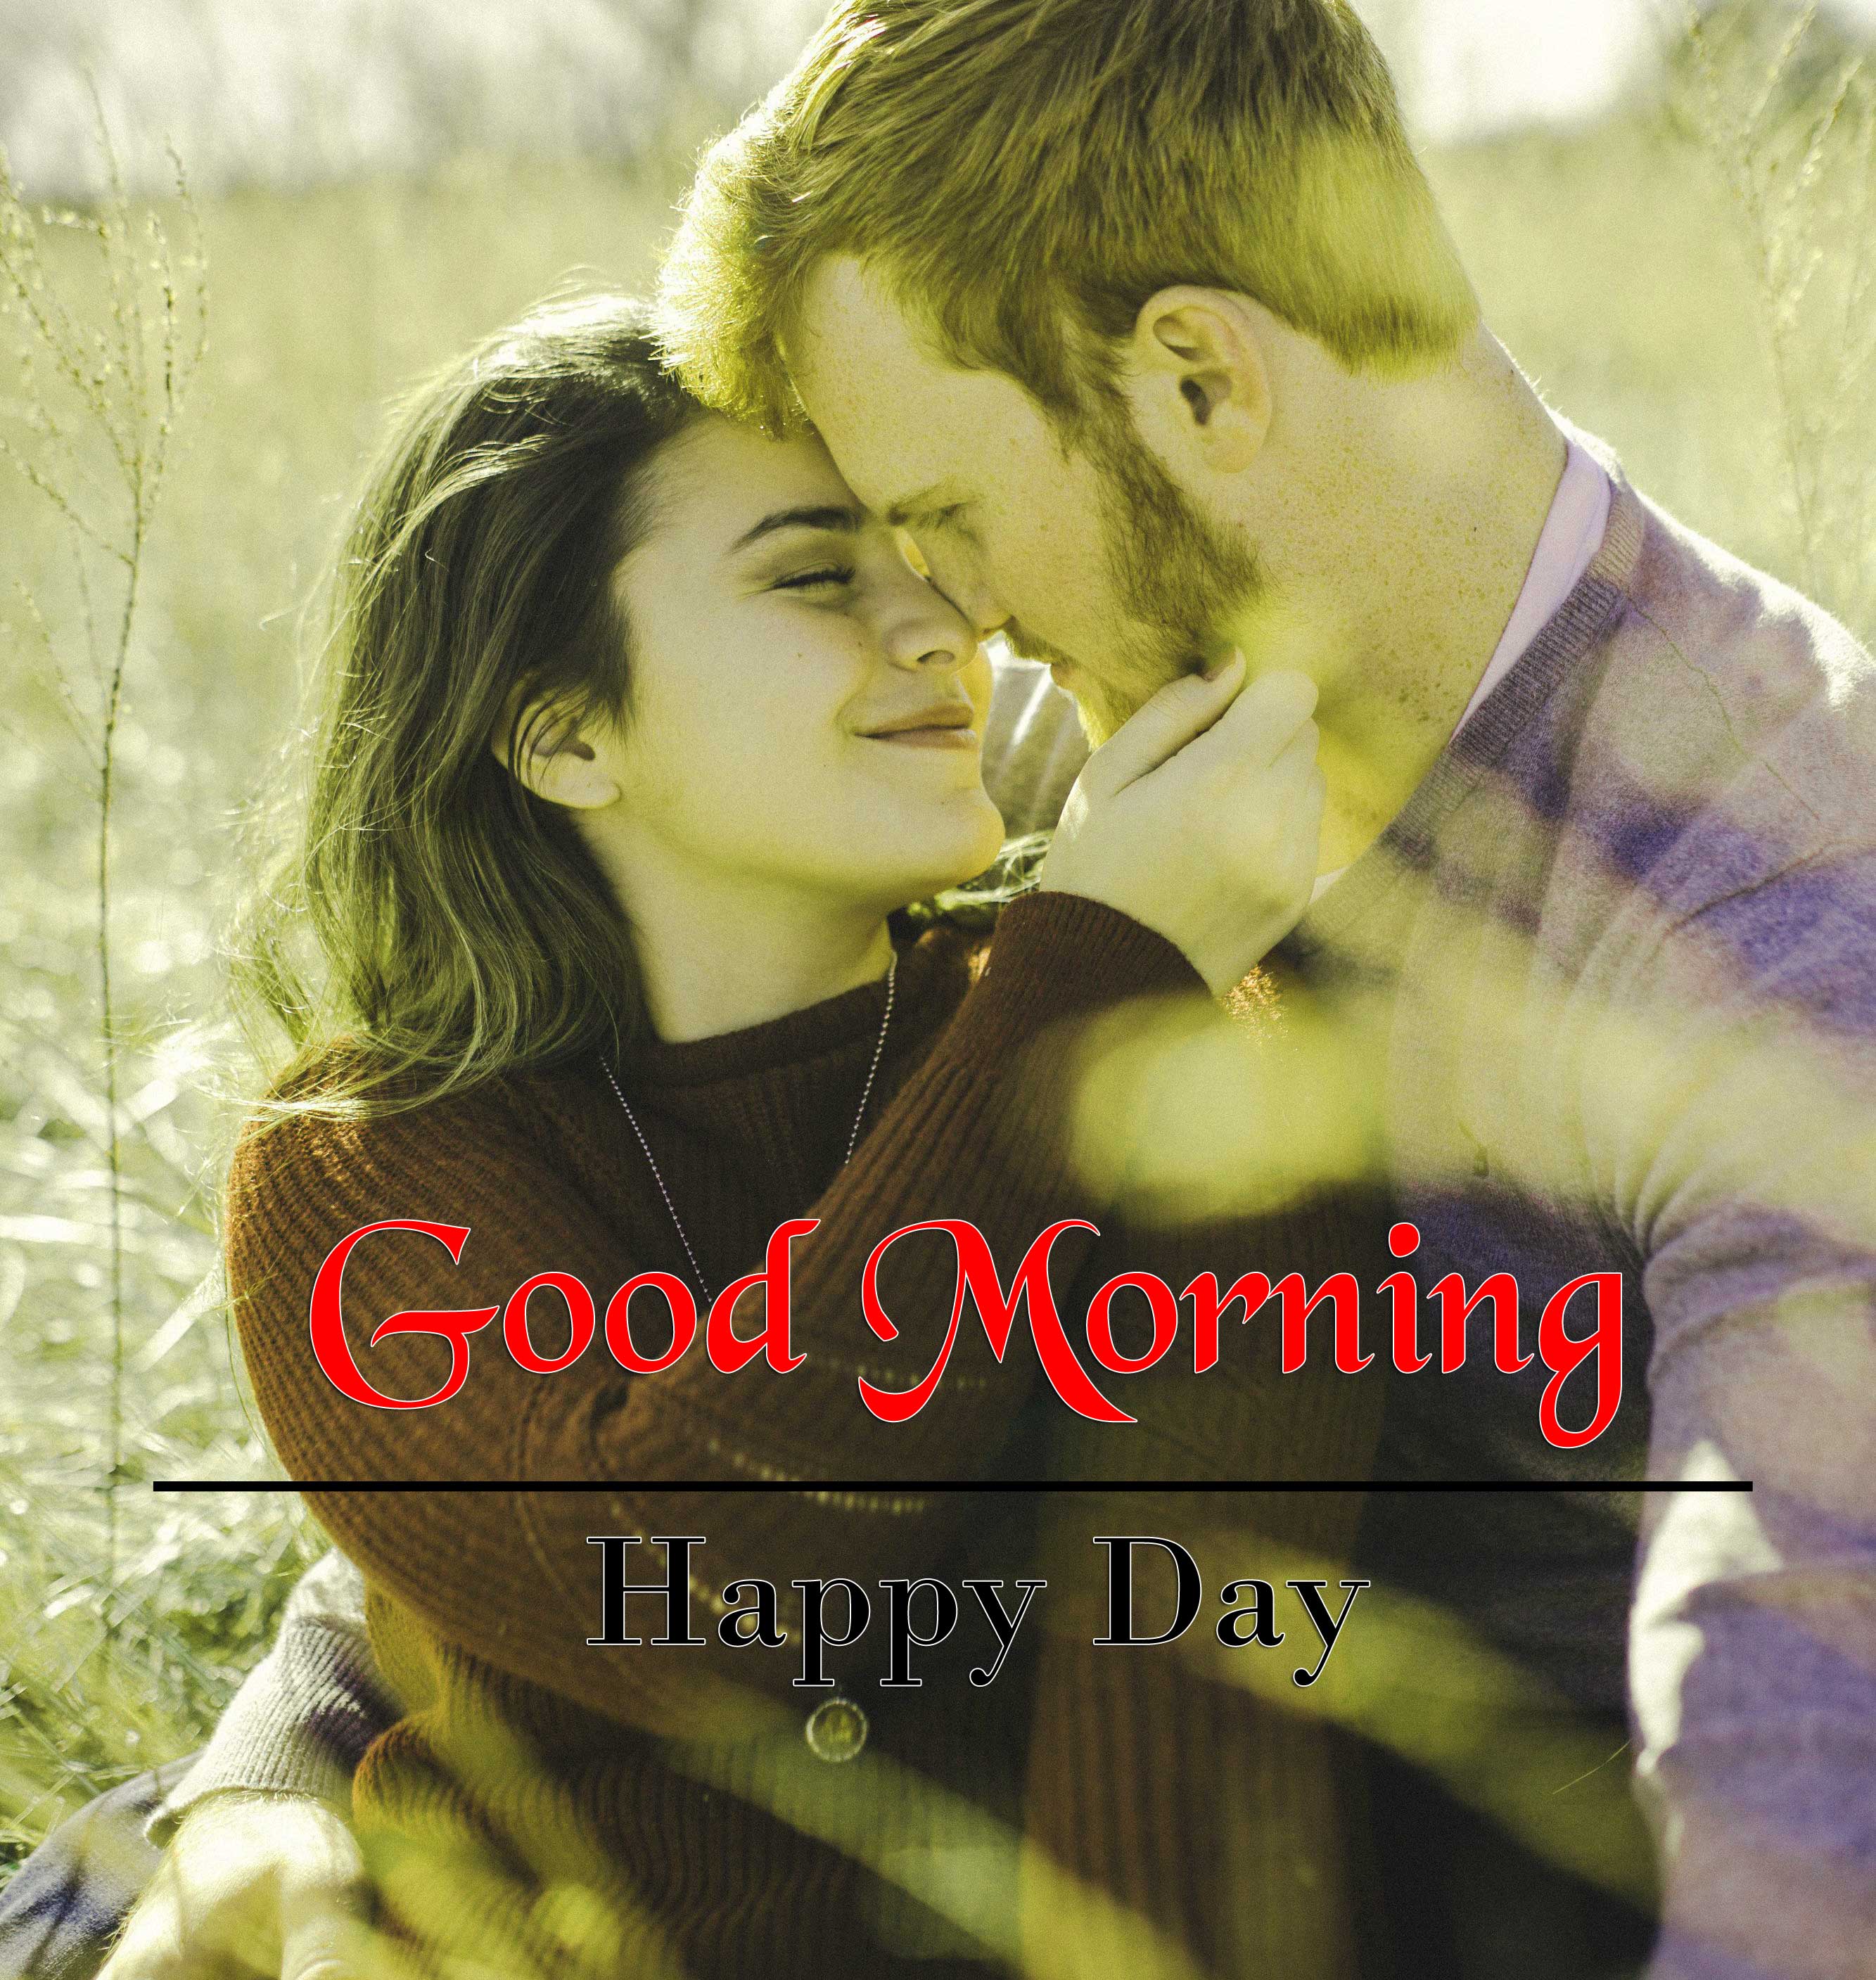 Latest Good Morning Pictures pIcs